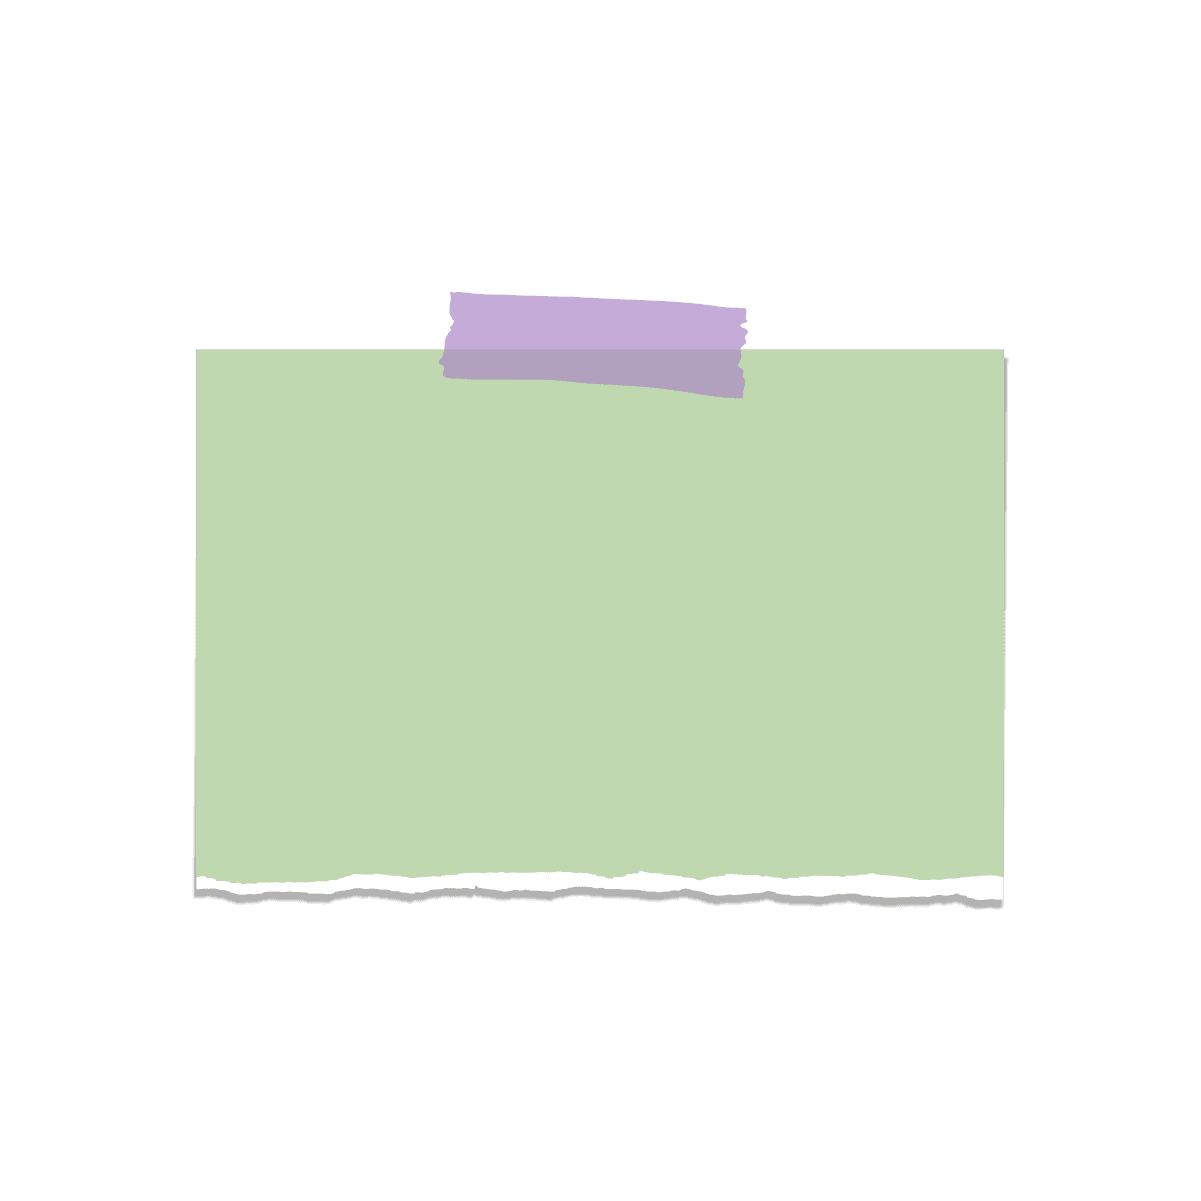 pastel sticky notes for digital planners - minimalist torn paper style with colorful tape accents